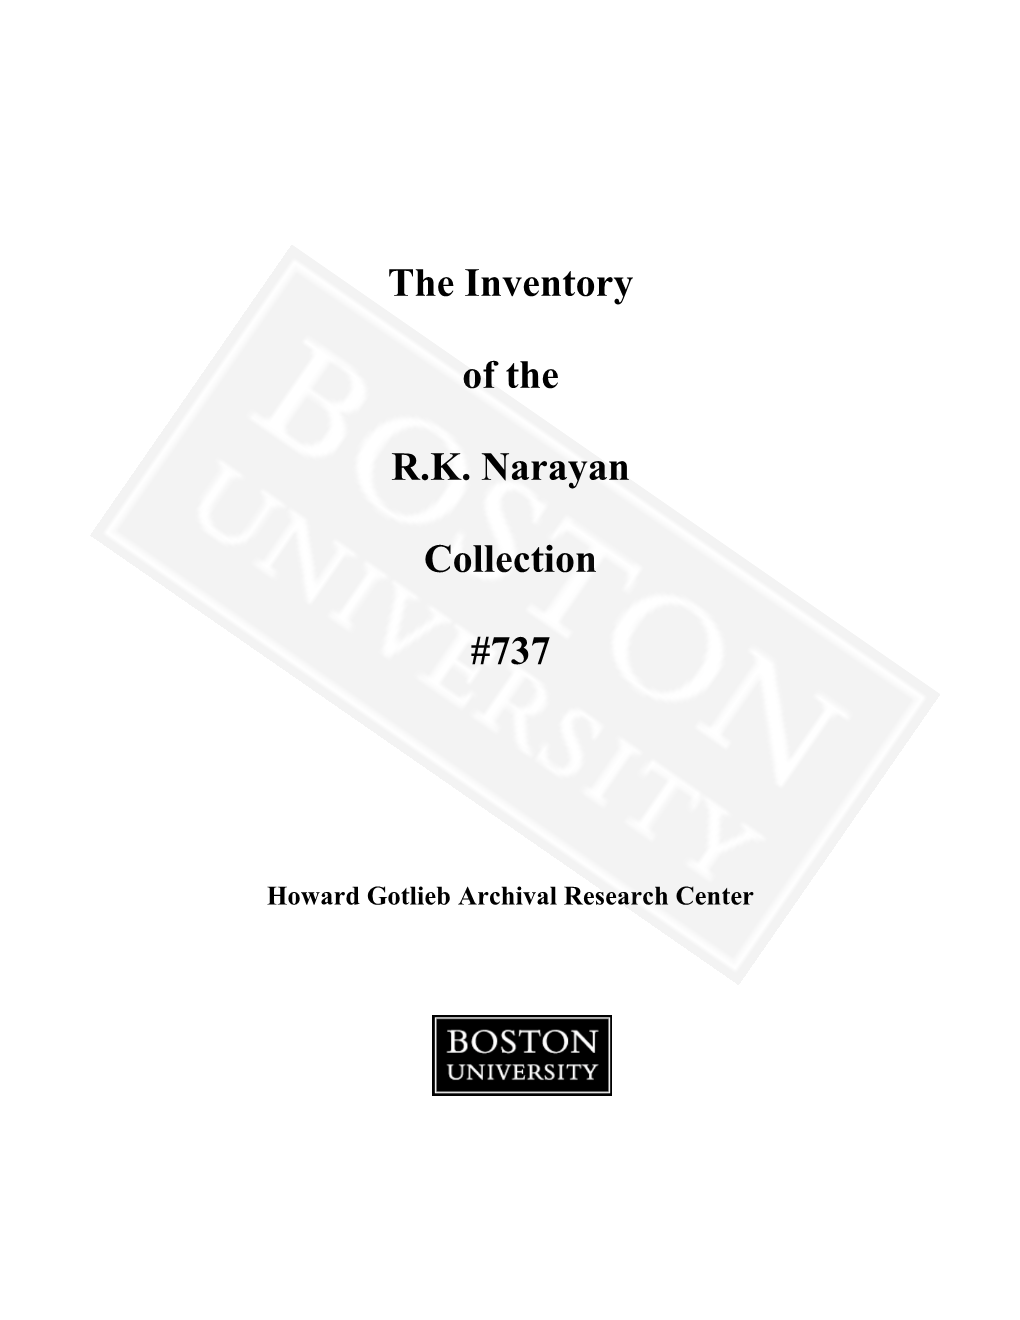 The Inventory of the R.K. Narayan Collection #737